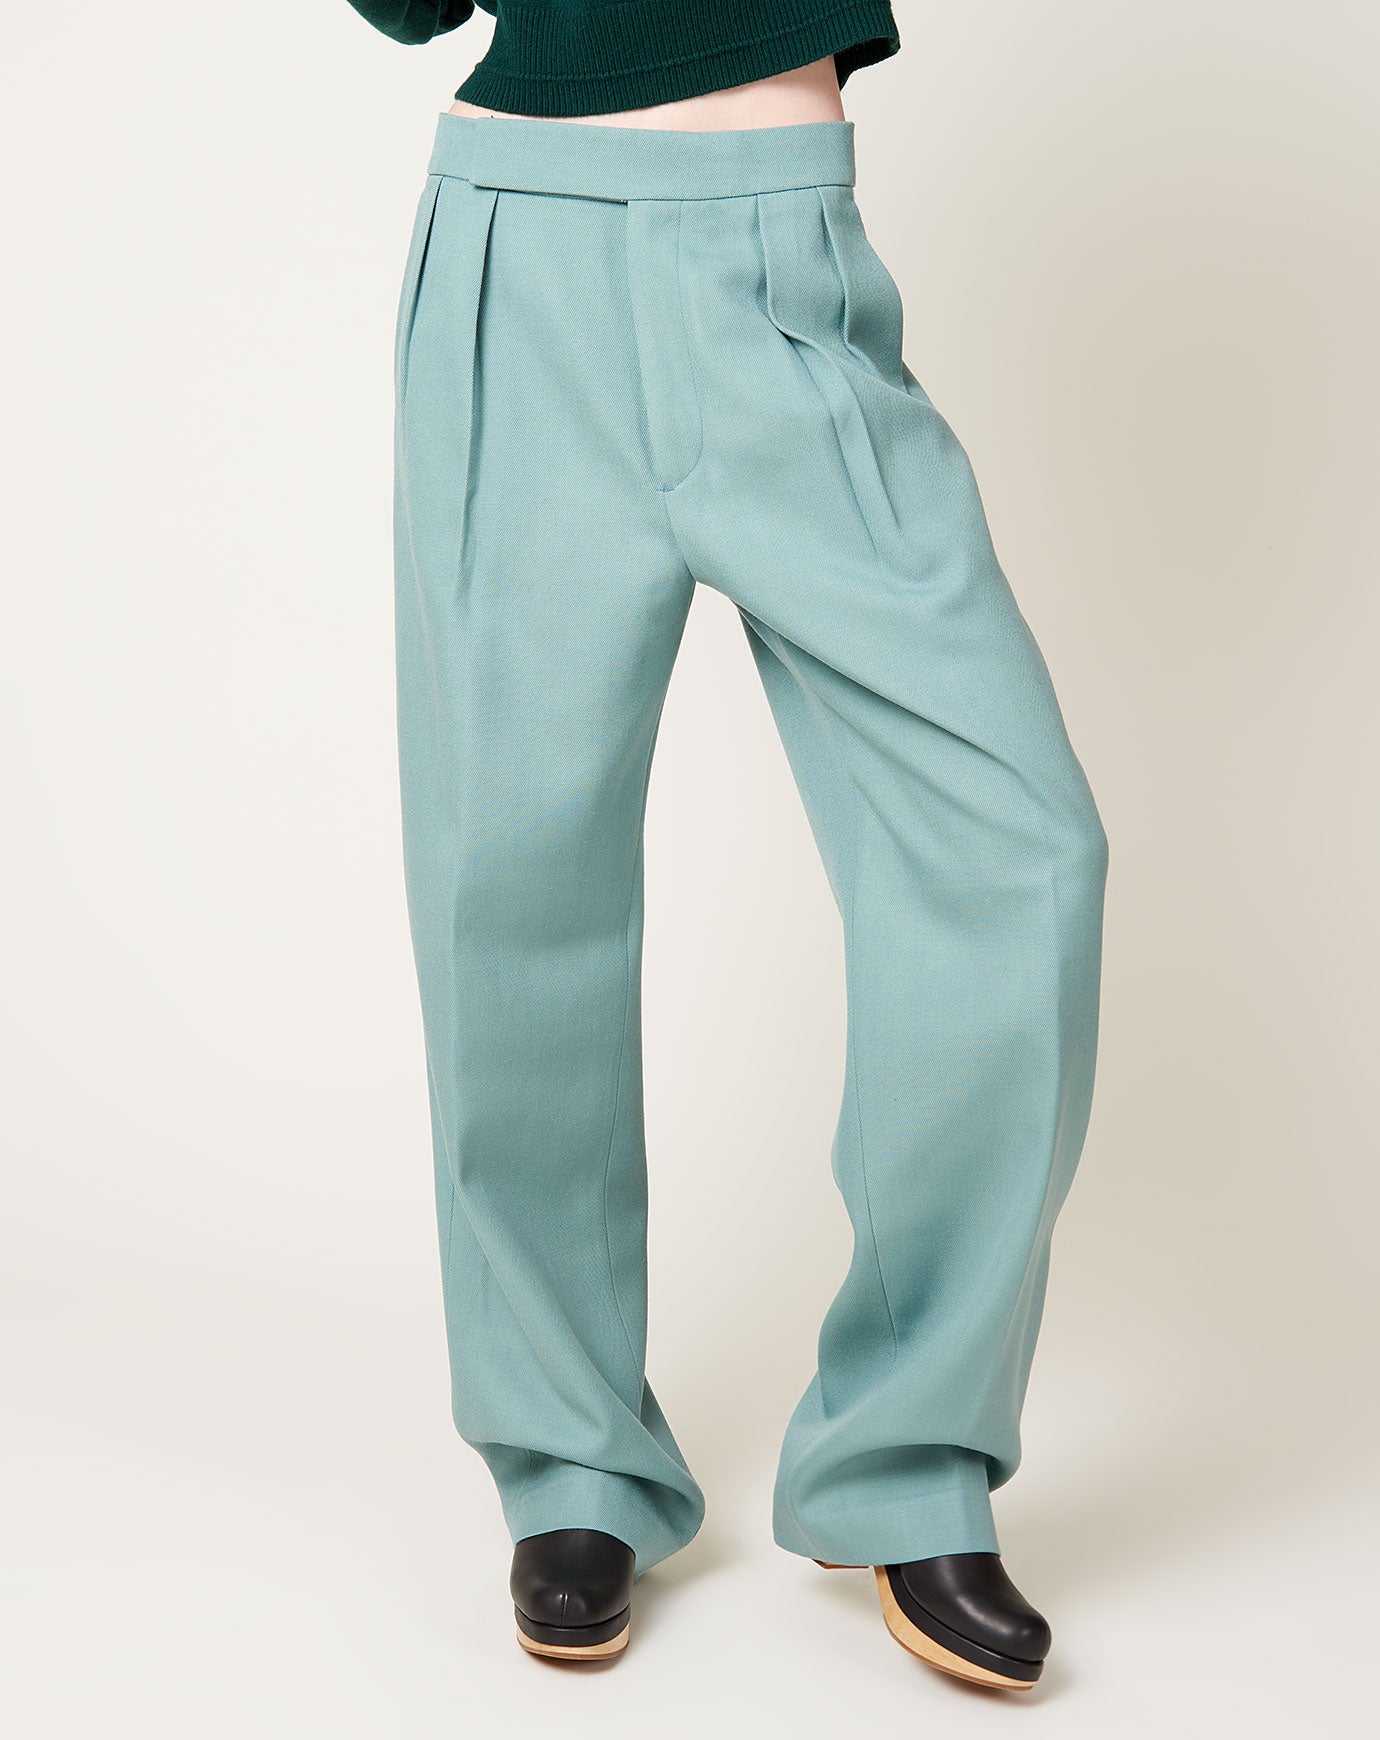 Christian Wijnants Ponza Tailored Trouser in Sage